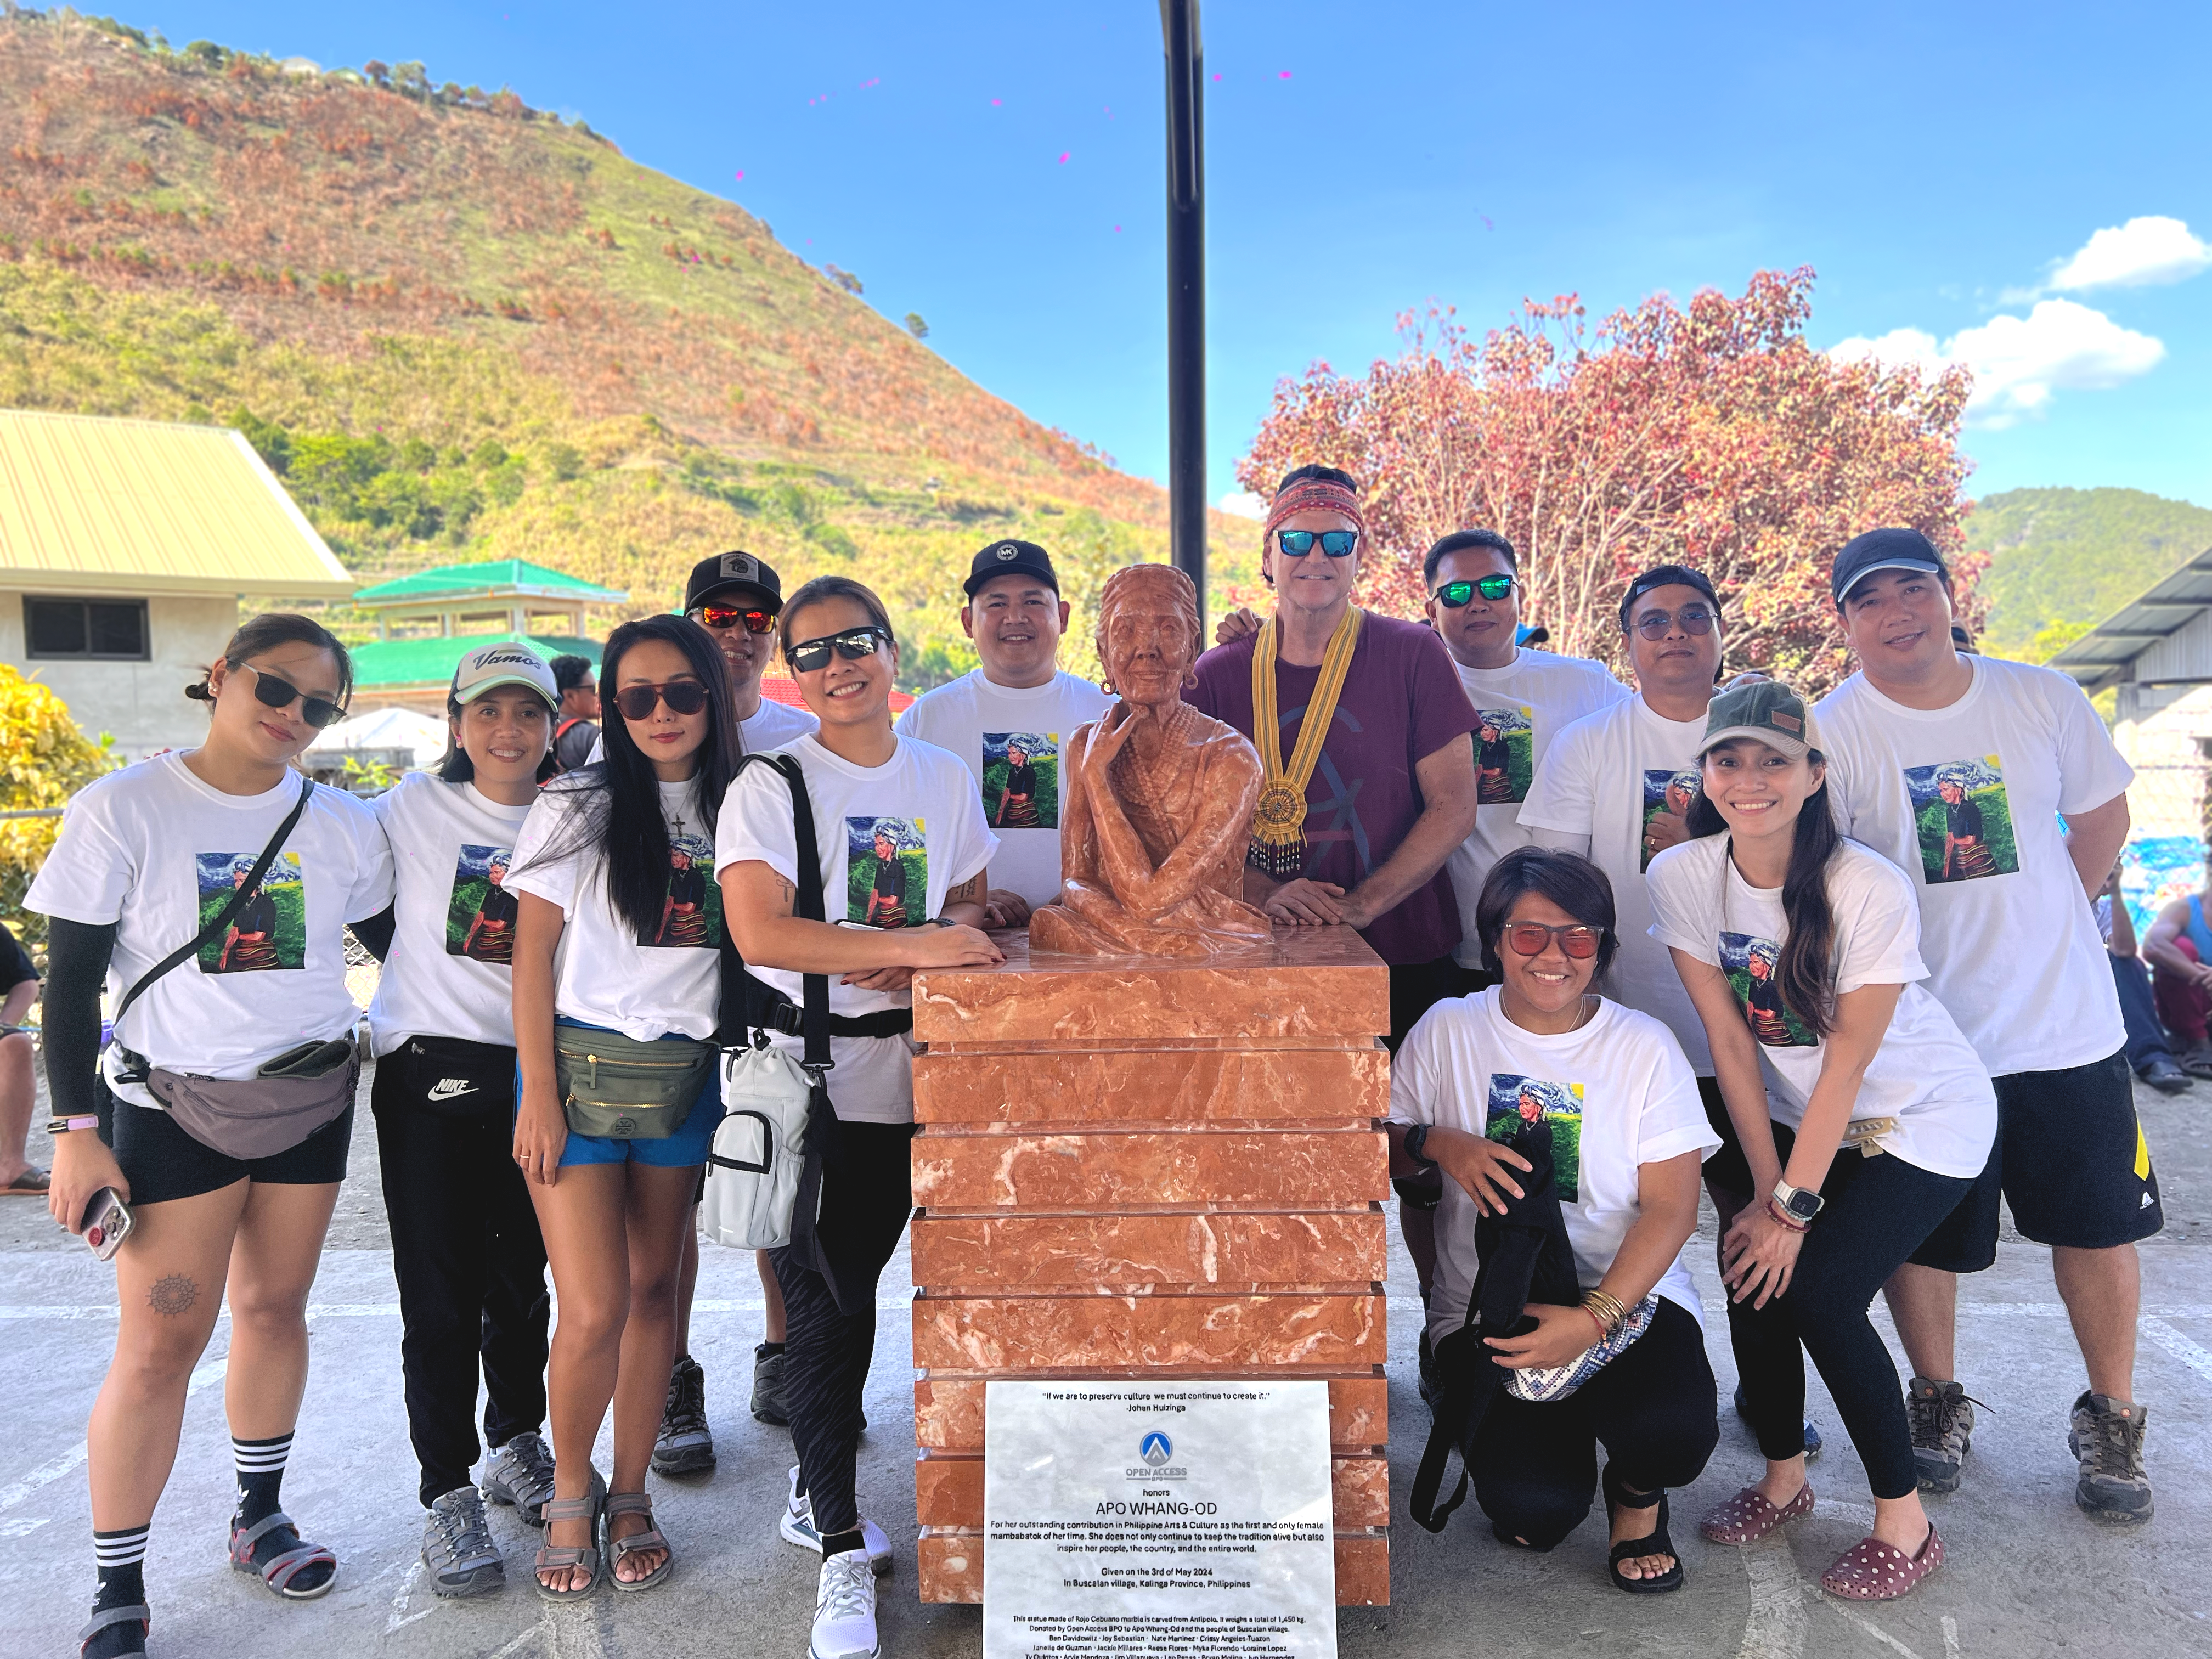 The Open Access BPO leadership team poses in front of Apo Whang-Od's bust